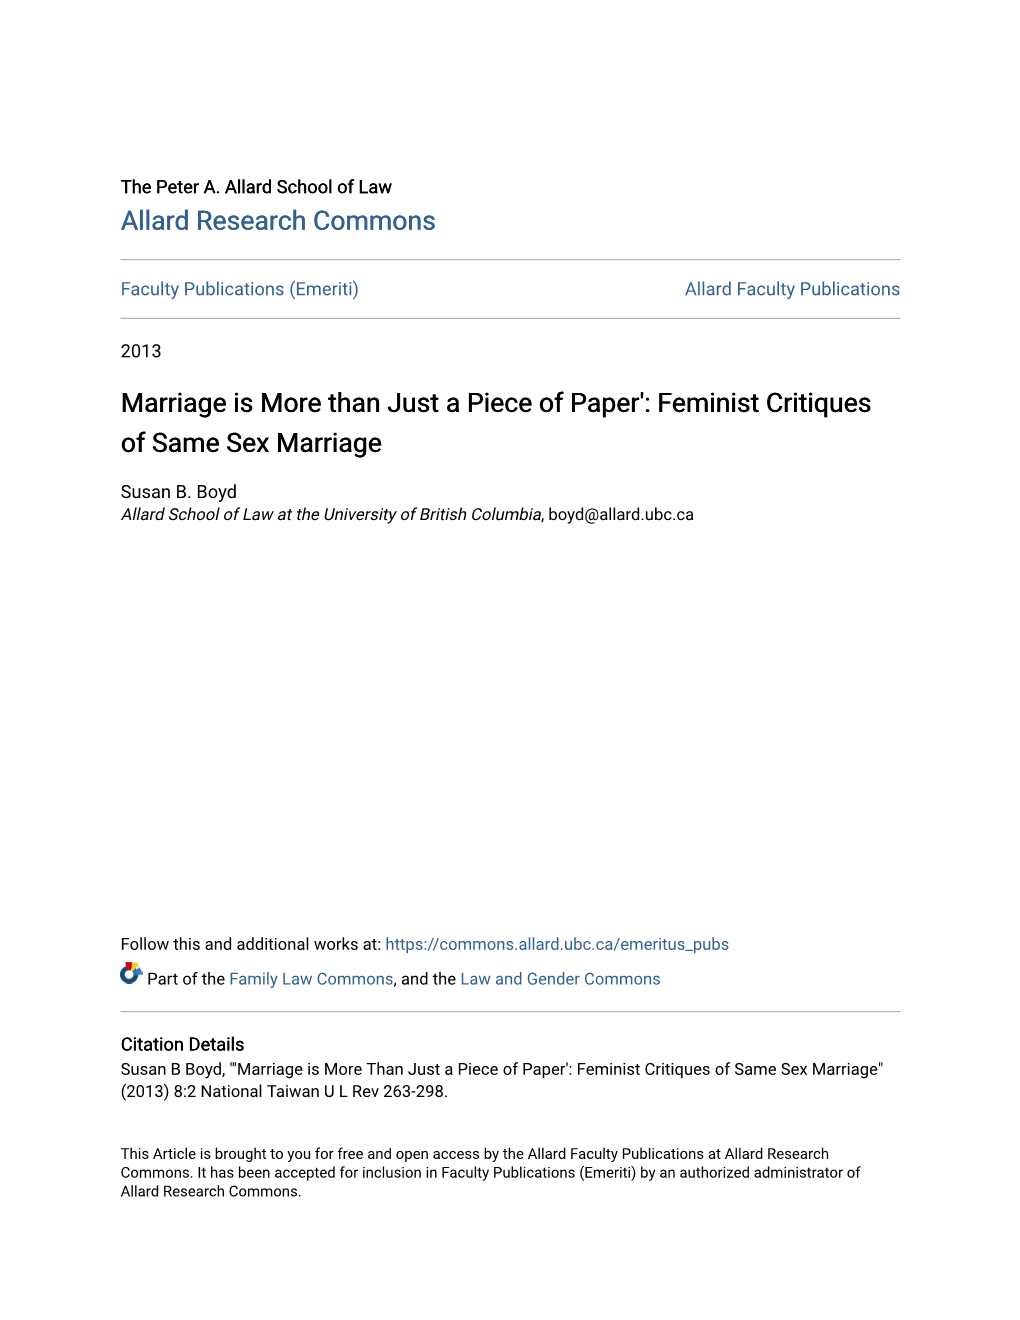 Feminist Critiques of Same Sex Marriage